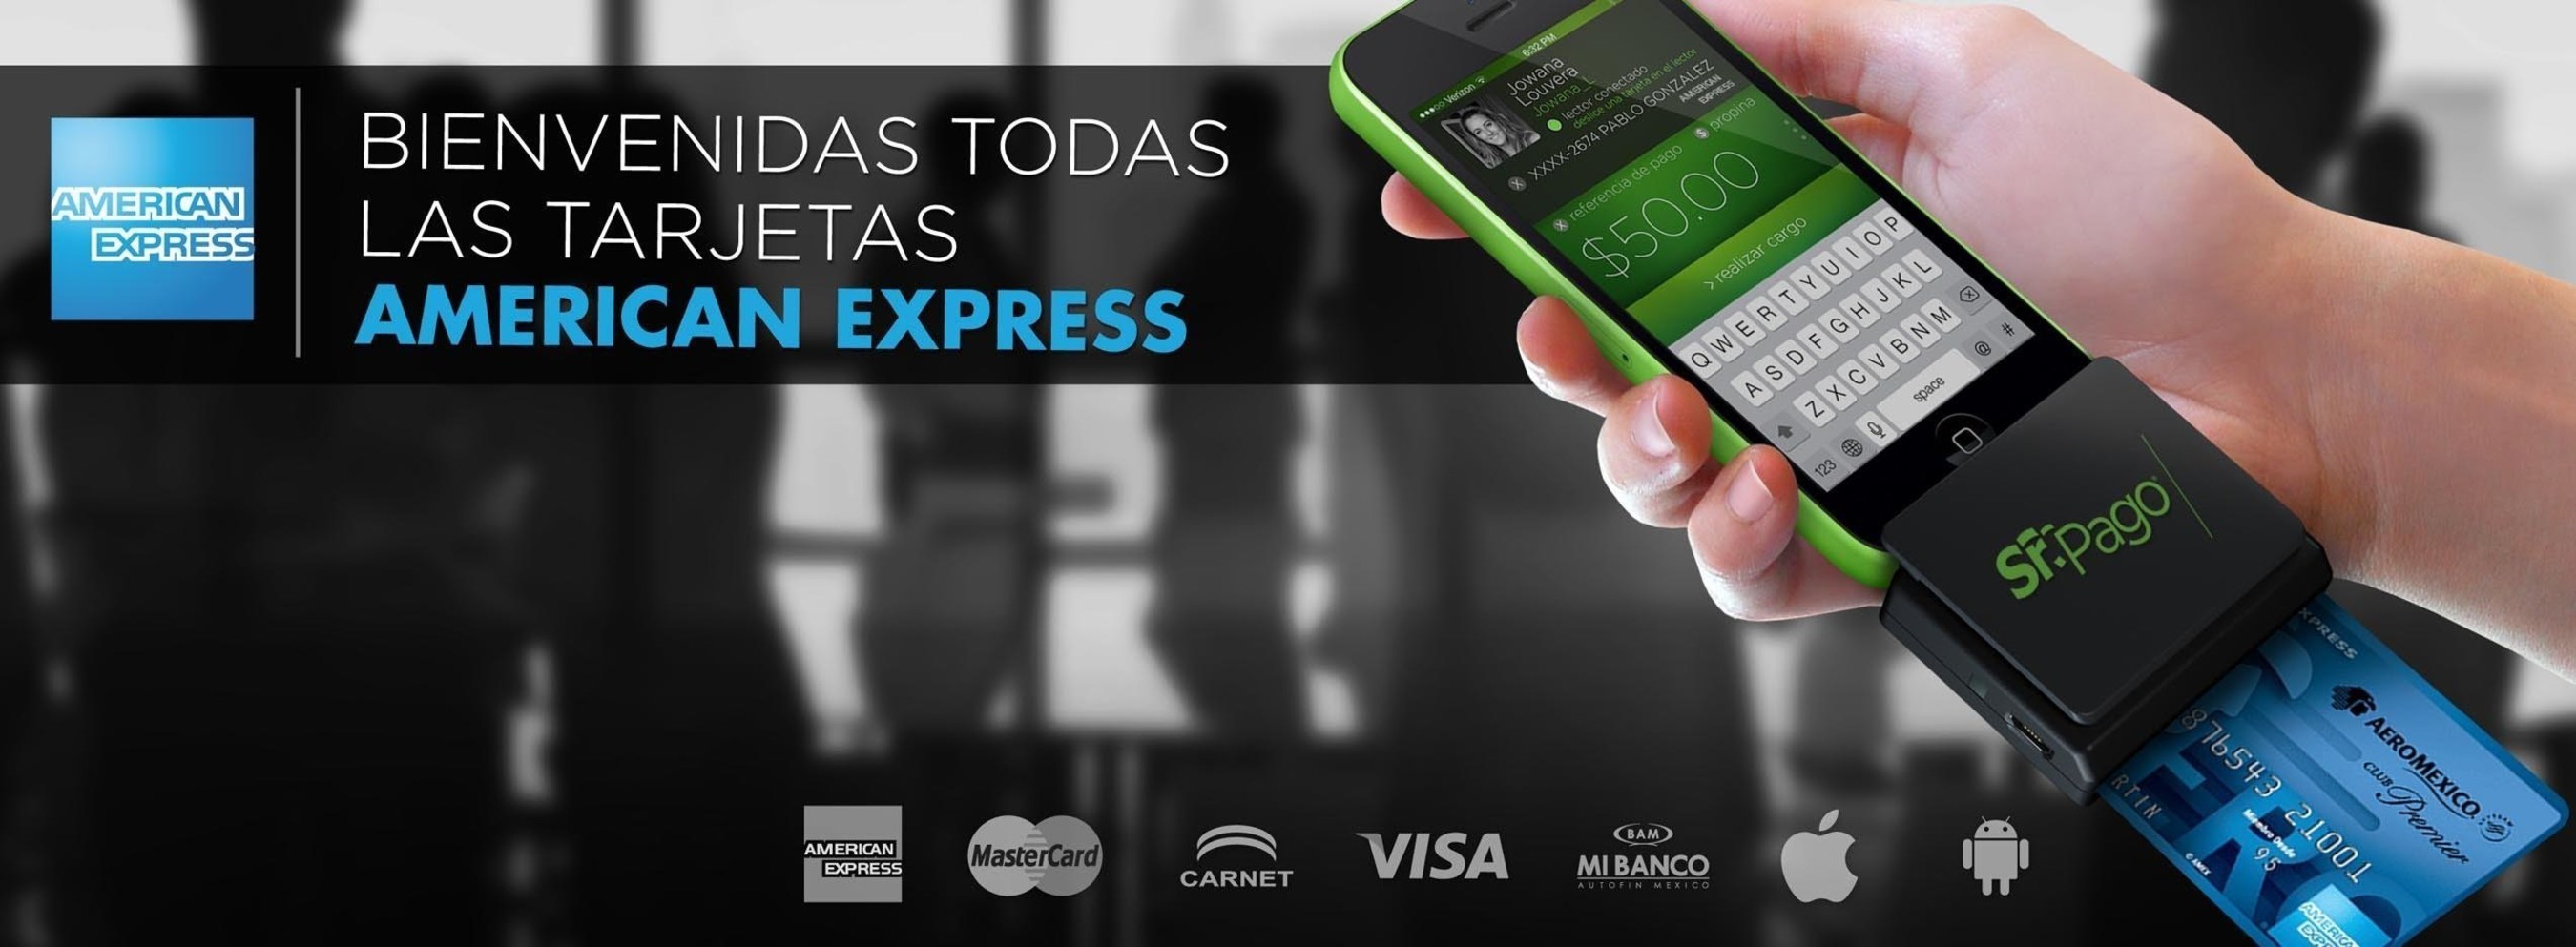 Welcome all American Express Cards in any Sr. Pago (Mr. Pay) Device